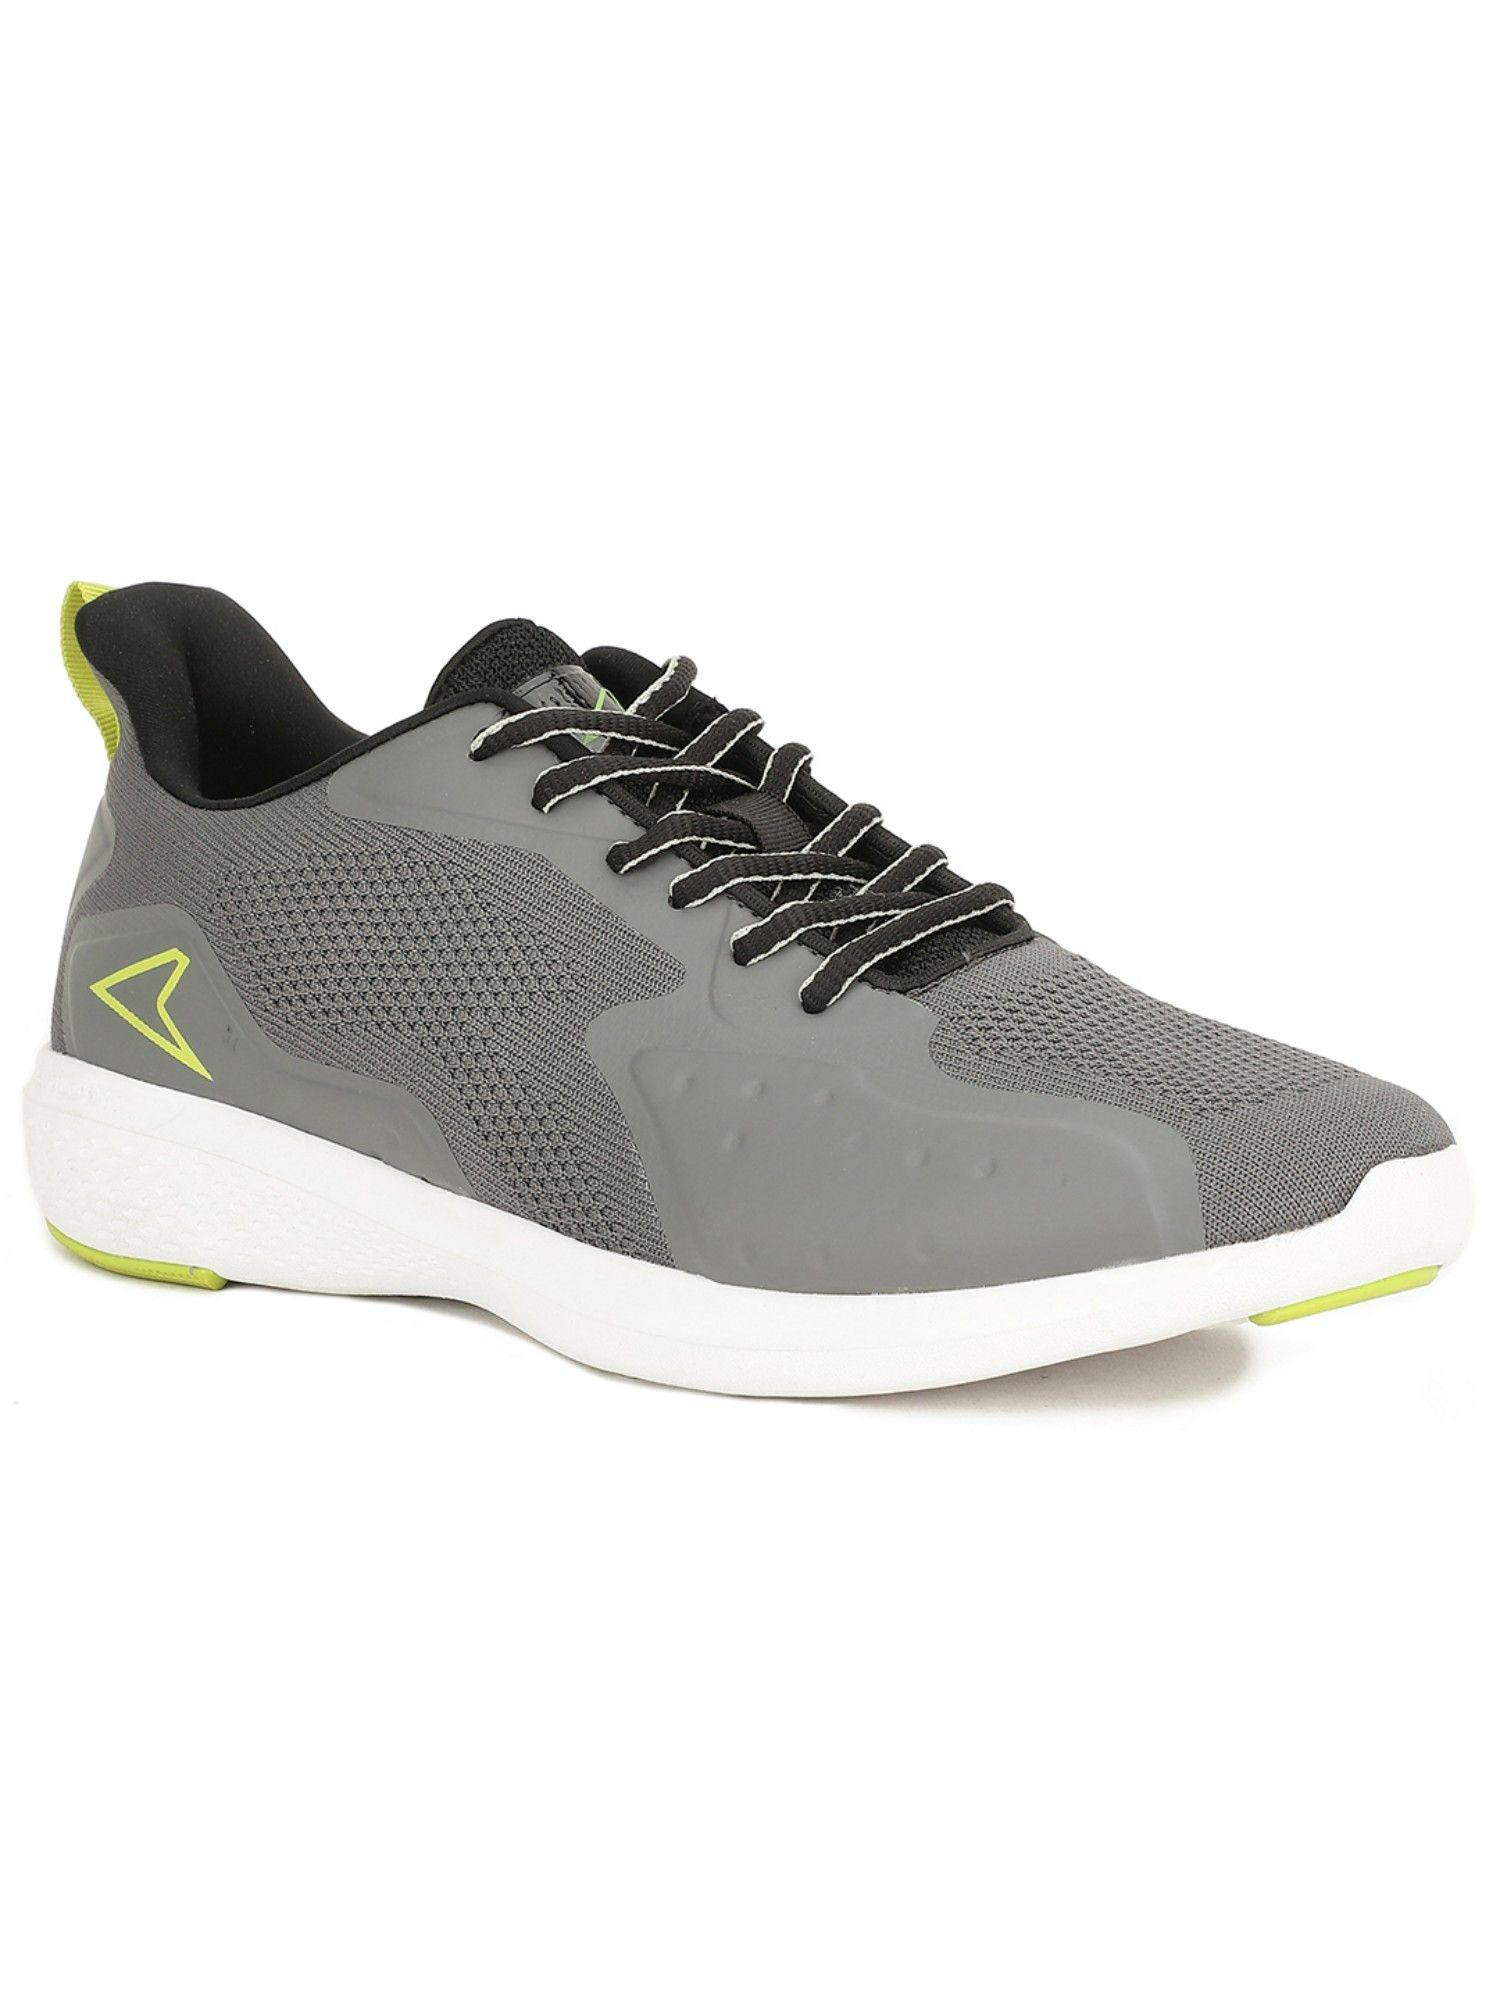 Training & Gym Shoes for Men (Grey)